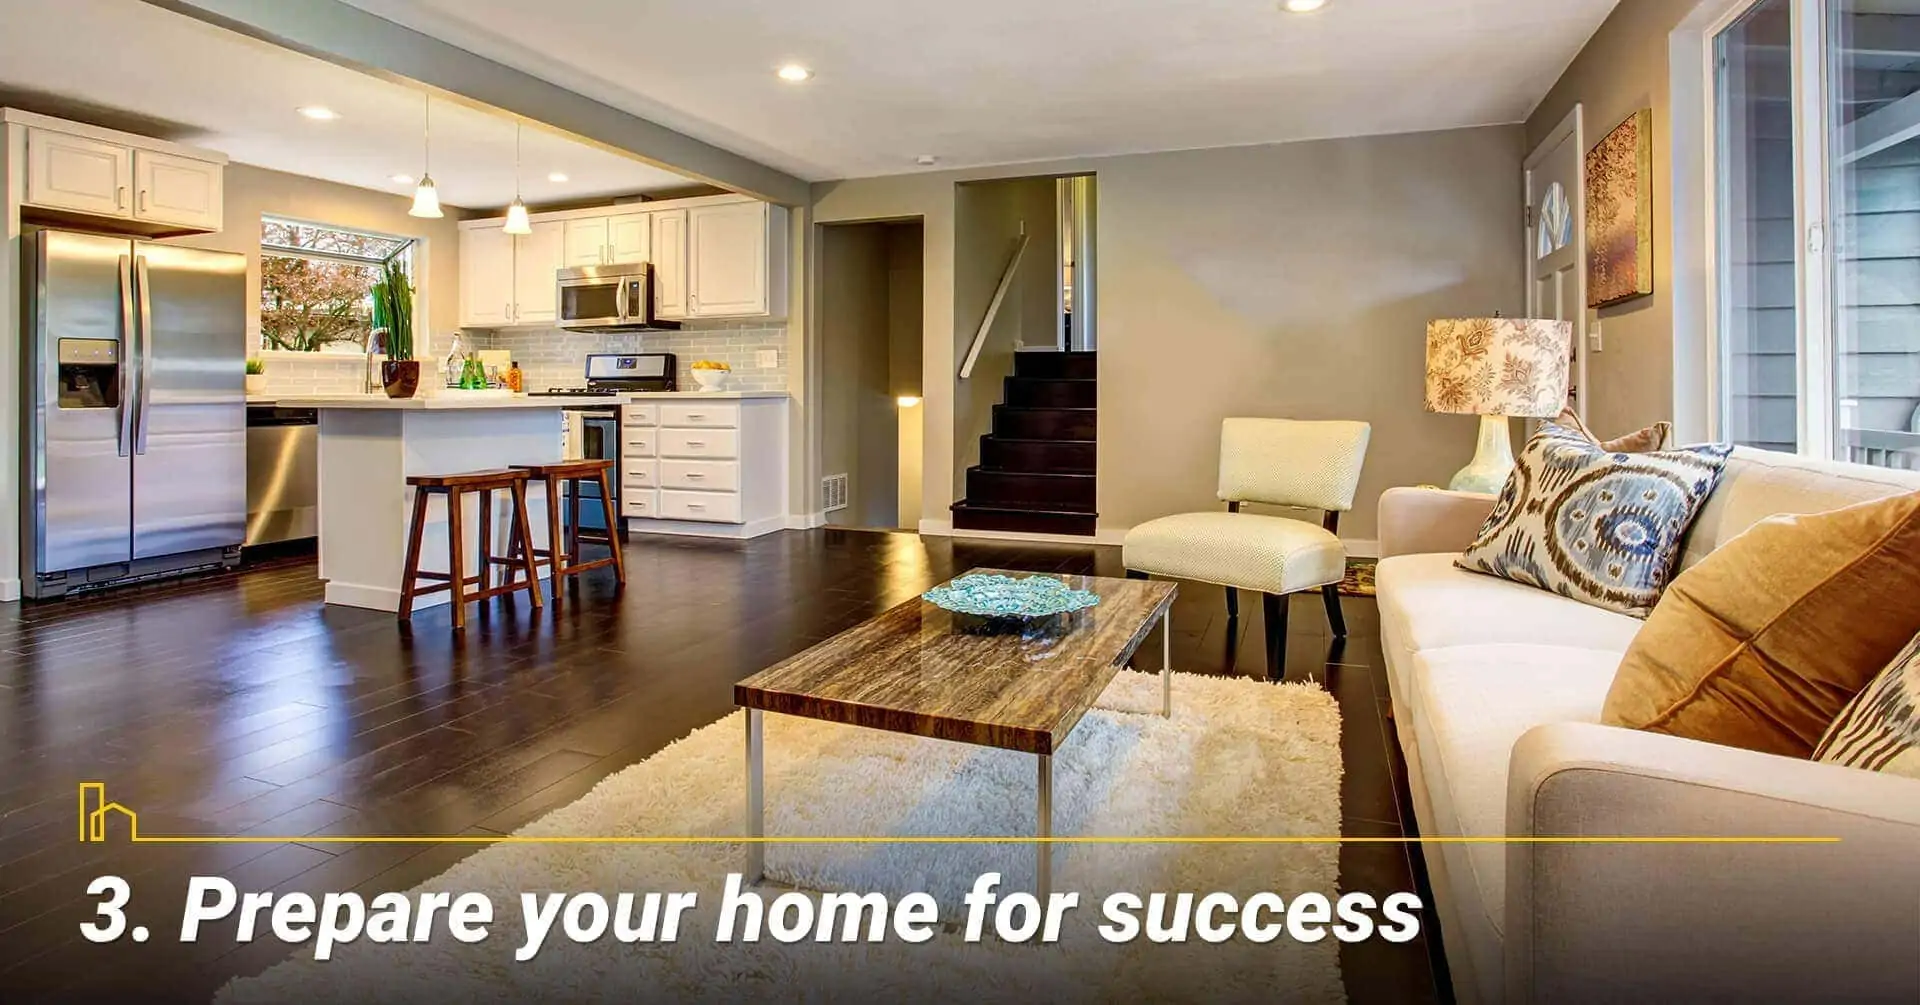 Prepare your home for success, get your house ready